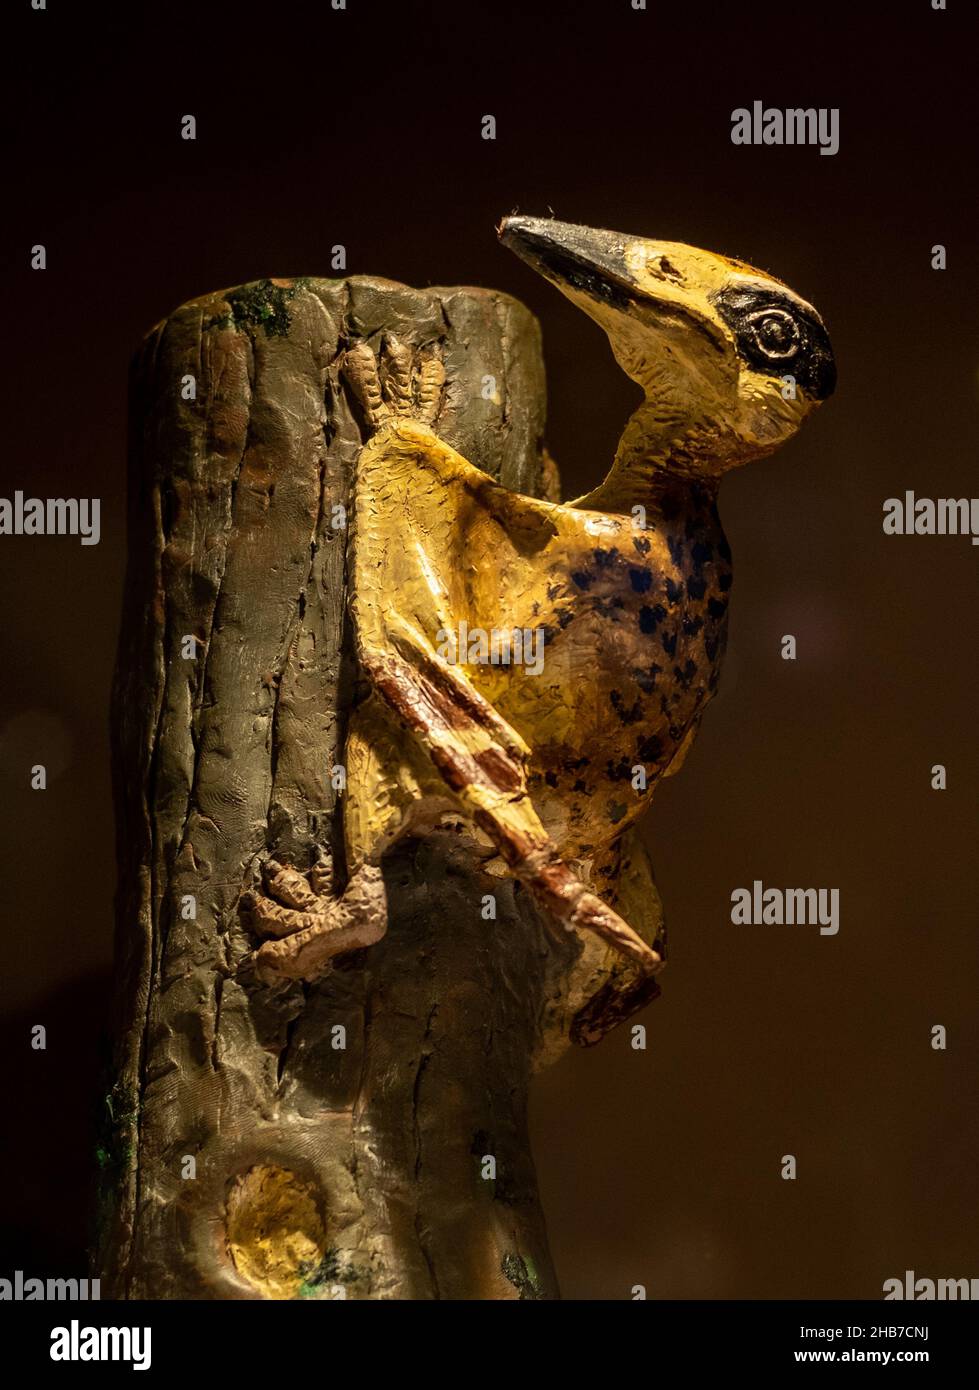 Restoration sculpture of Nemicolopterus crypticus (hidden flying forest dweller). Stock Photo